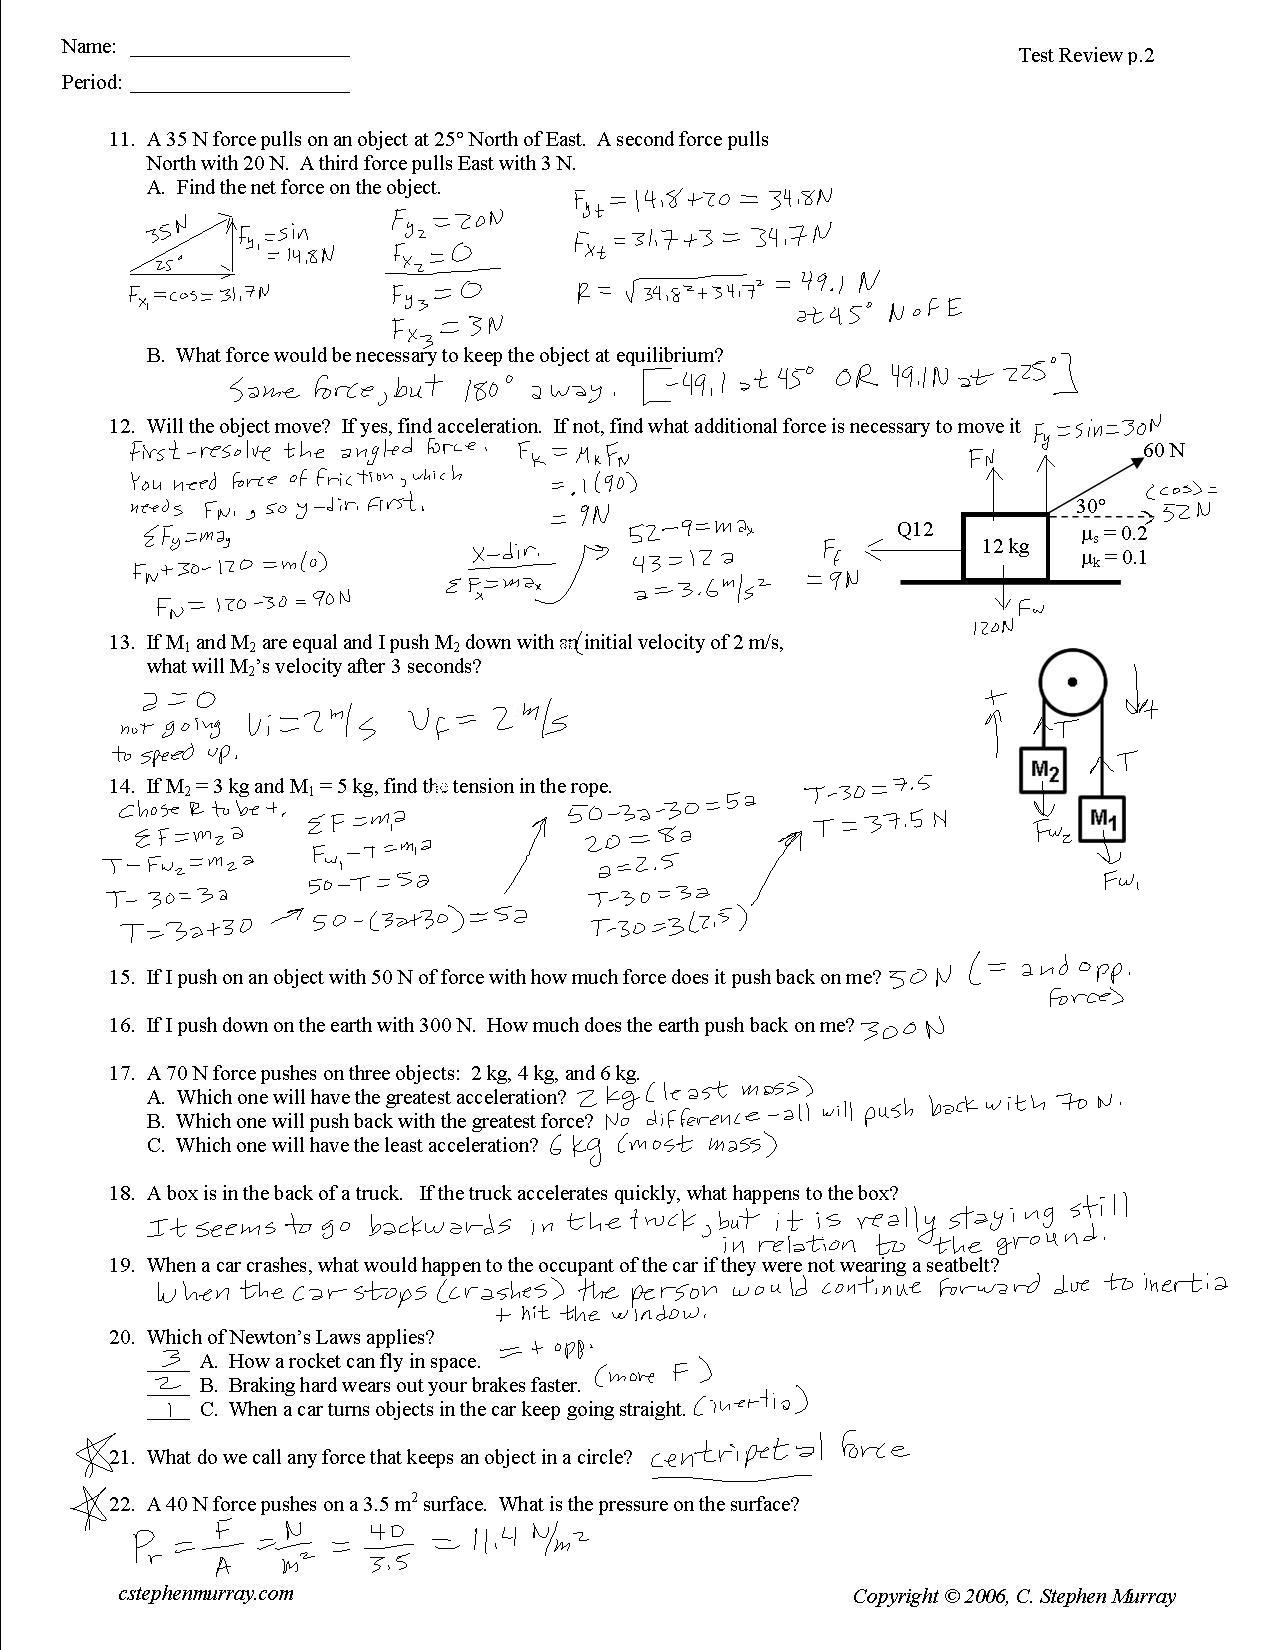 Newtons Laws Worksheet Answers - Promotiontablecovers Regarding Newton Laws Worksheet Answers